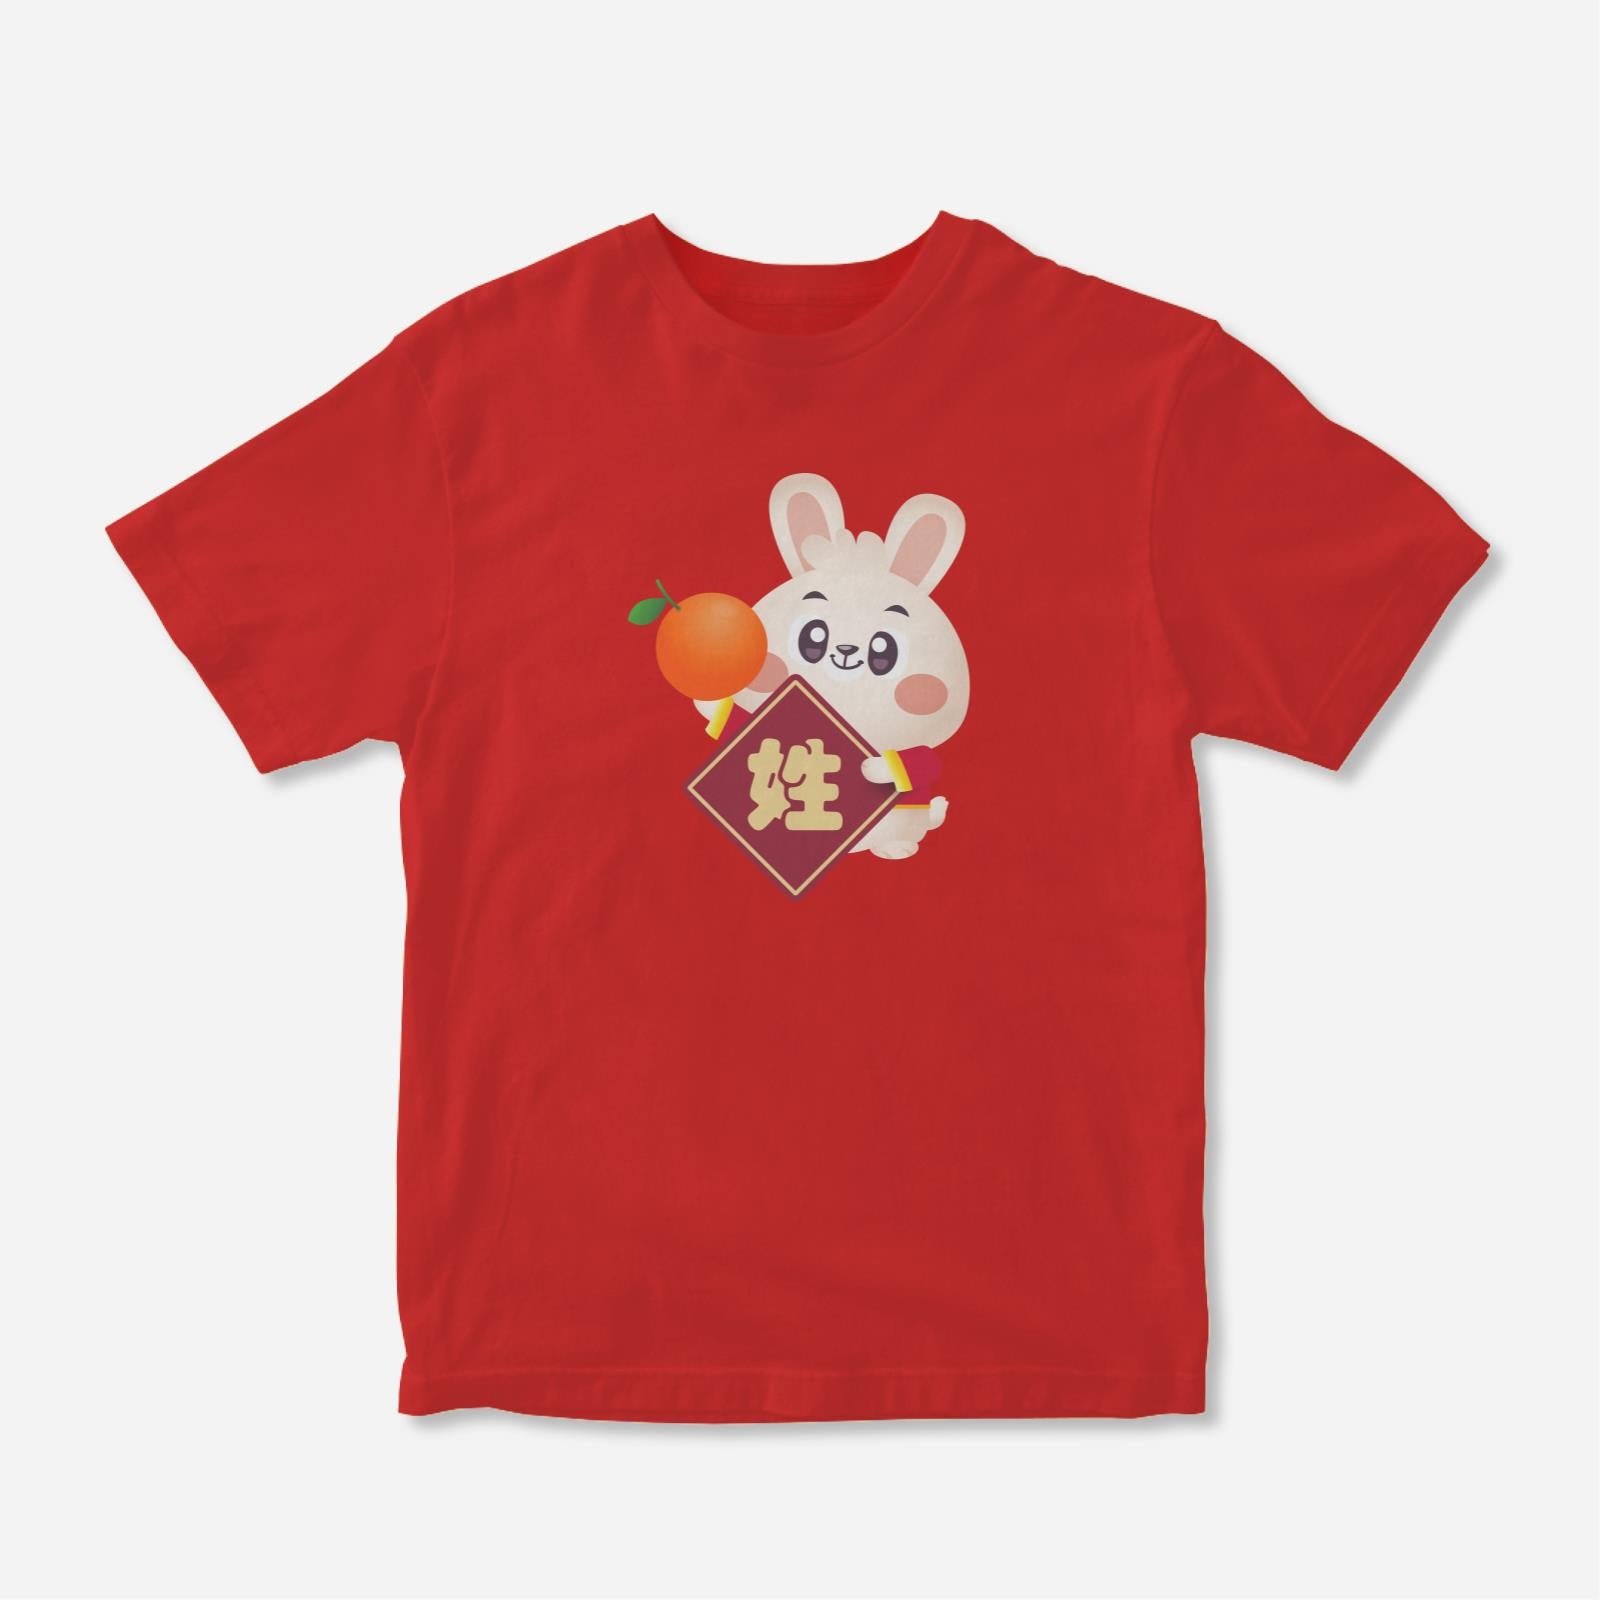 Cny Rabbit Family - Surname Brother Rabbit Kids Tee Shirt with Chinese Surname